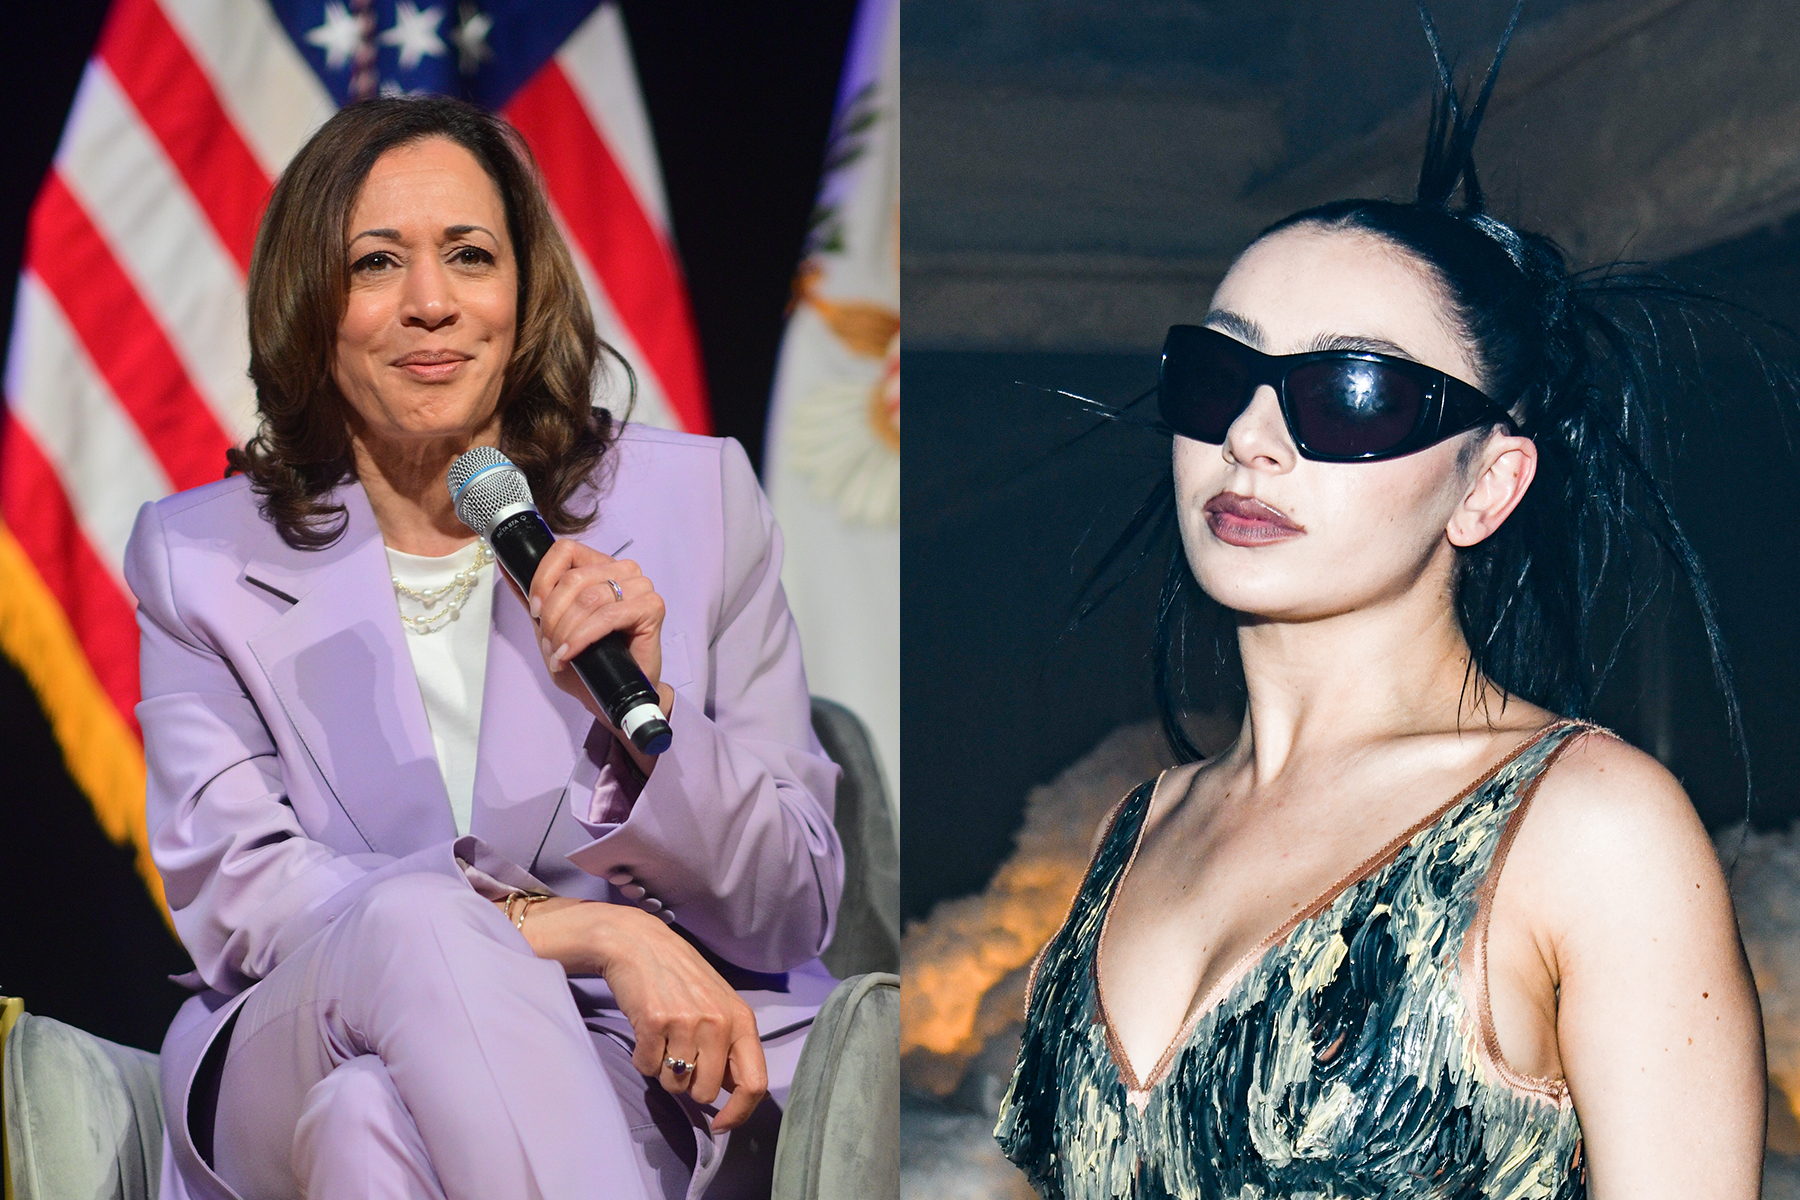 Charli XCX Fans Are All In for Kamala Harris